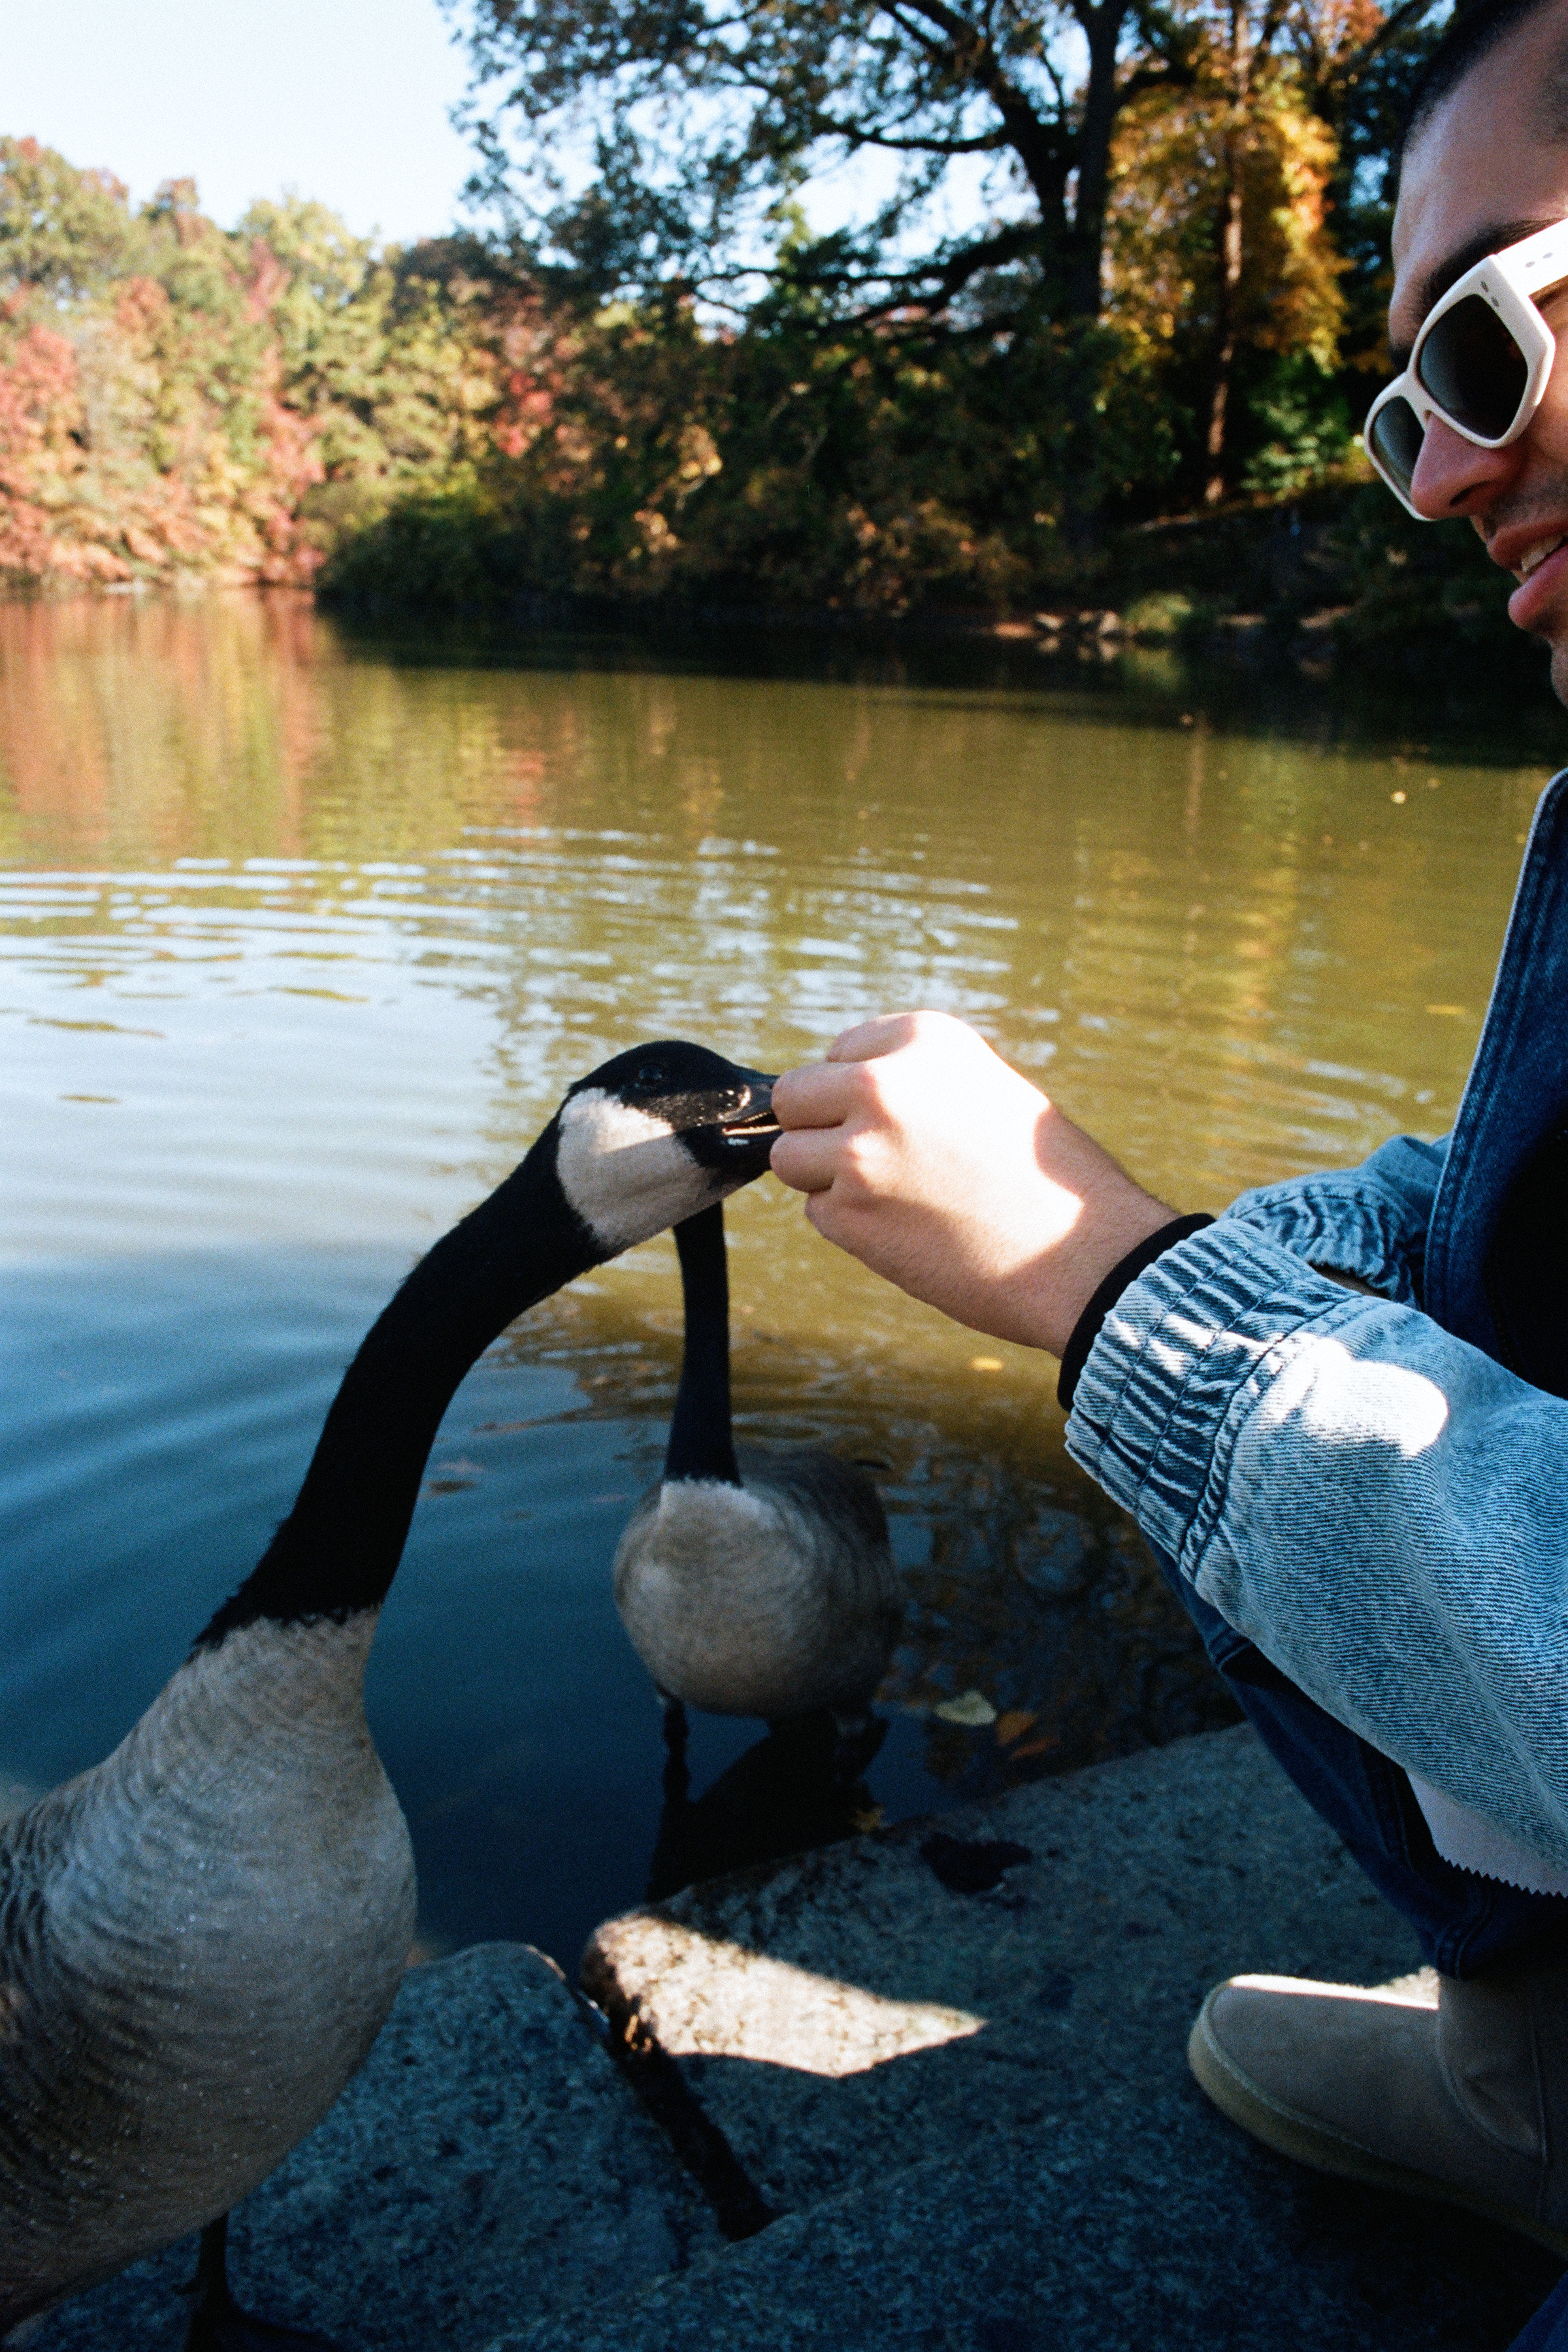 feeding two geese in central park